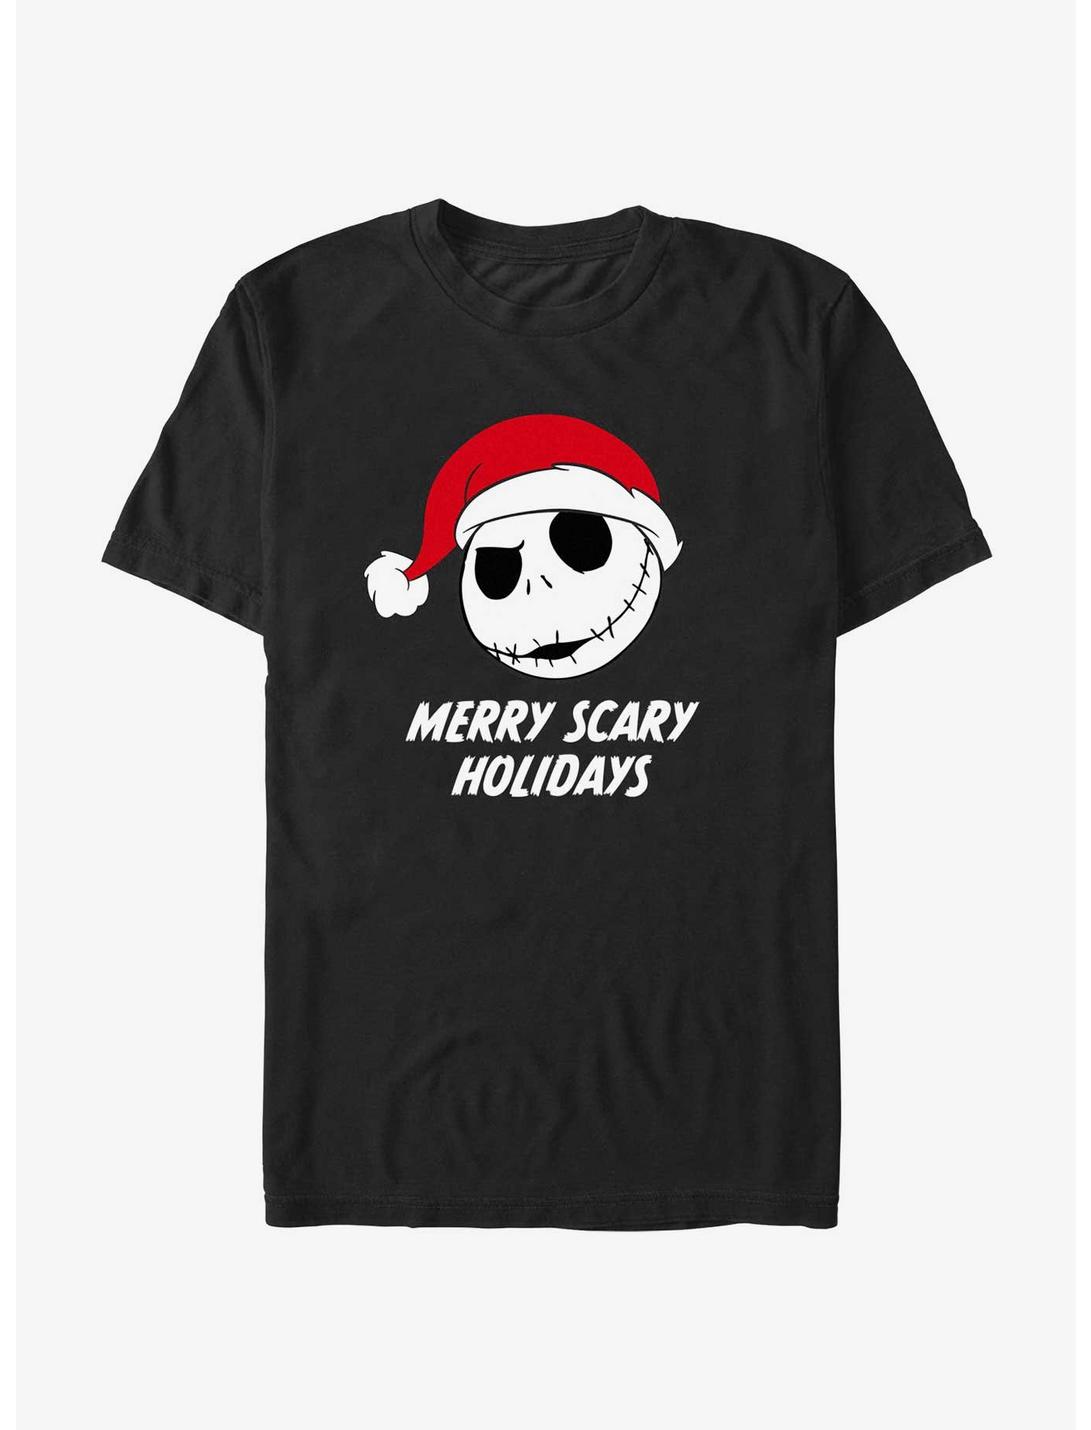 Disney Nightmare Before Christmas Merry Scary Holidays T-Shirt, BLACK, hi-res